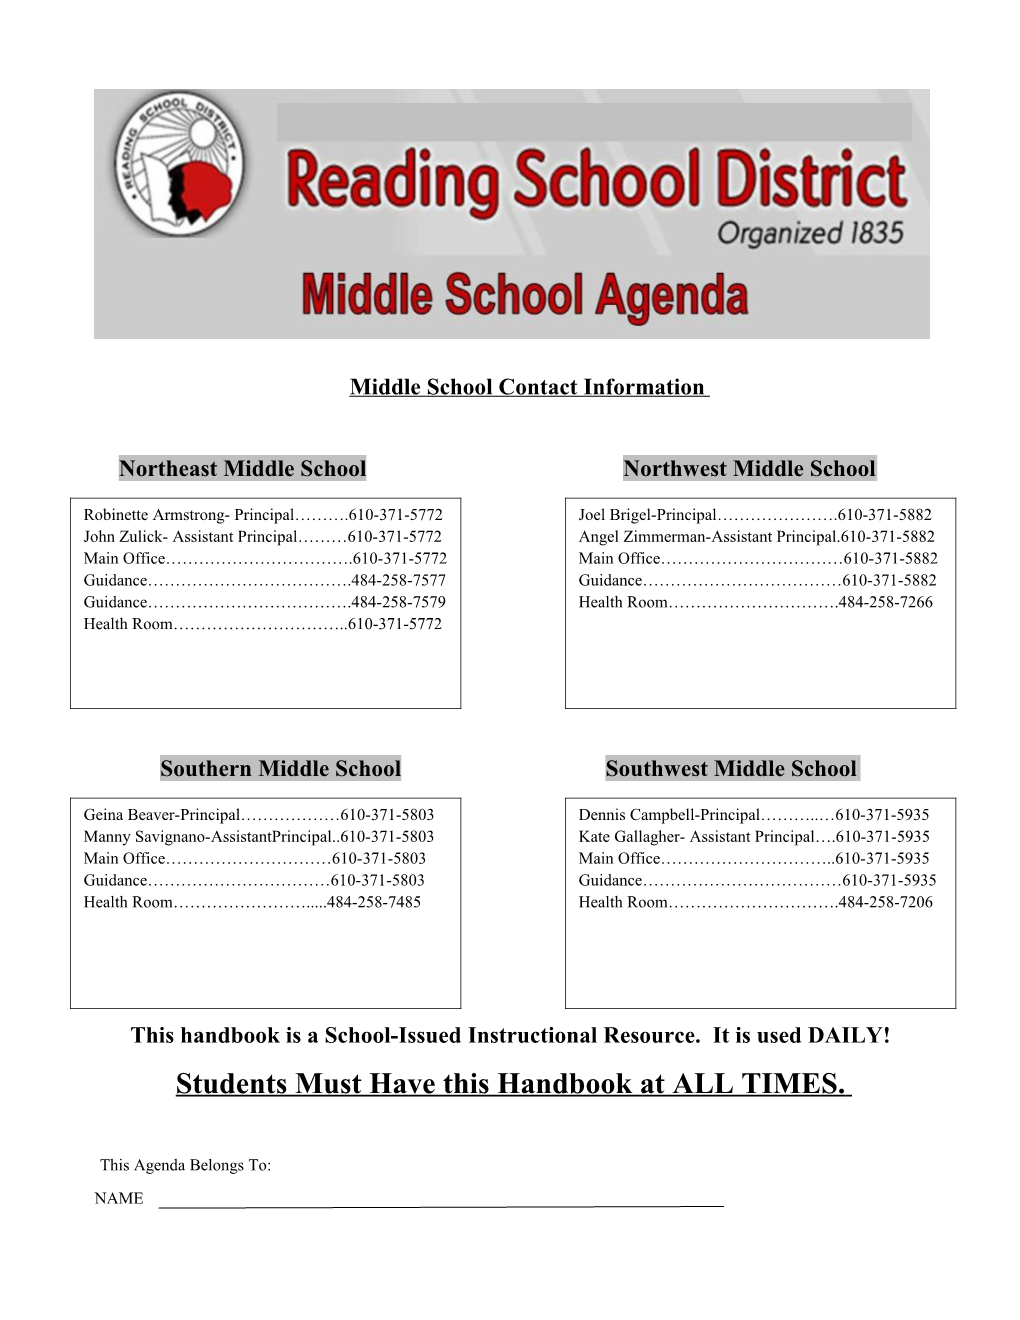 Middle School Contact Information